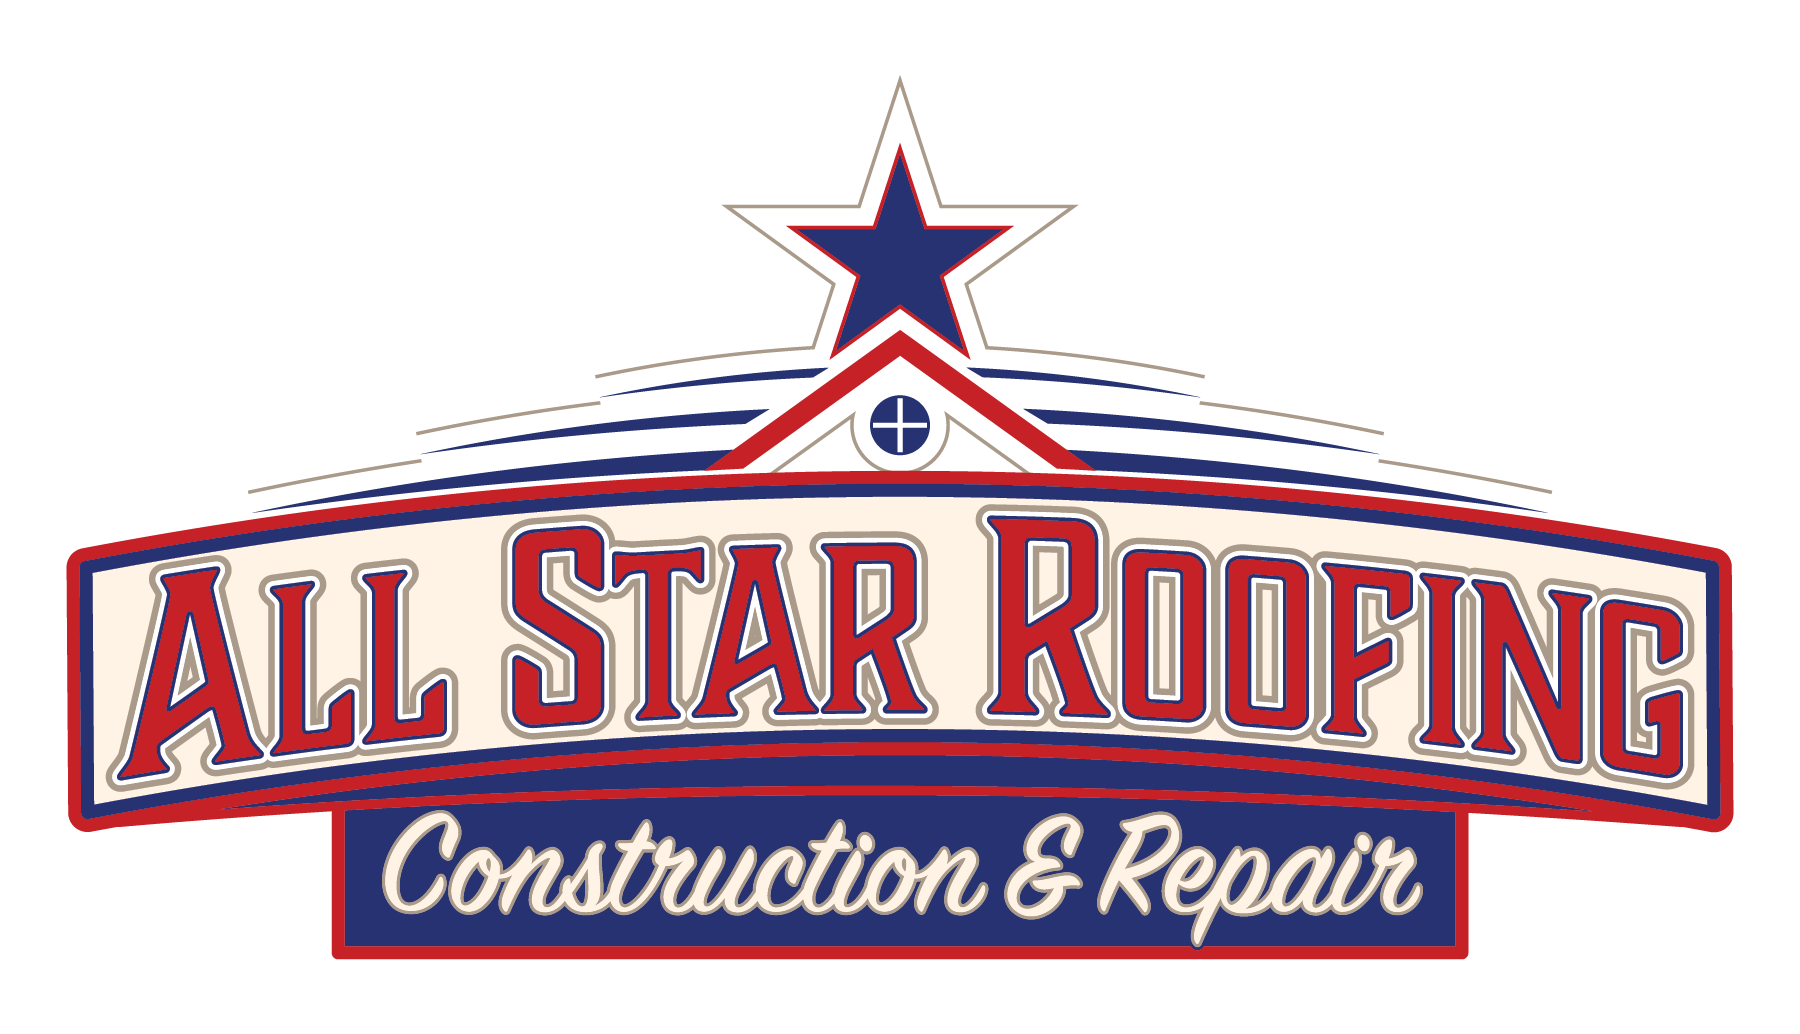 All Star Roofing, Inc